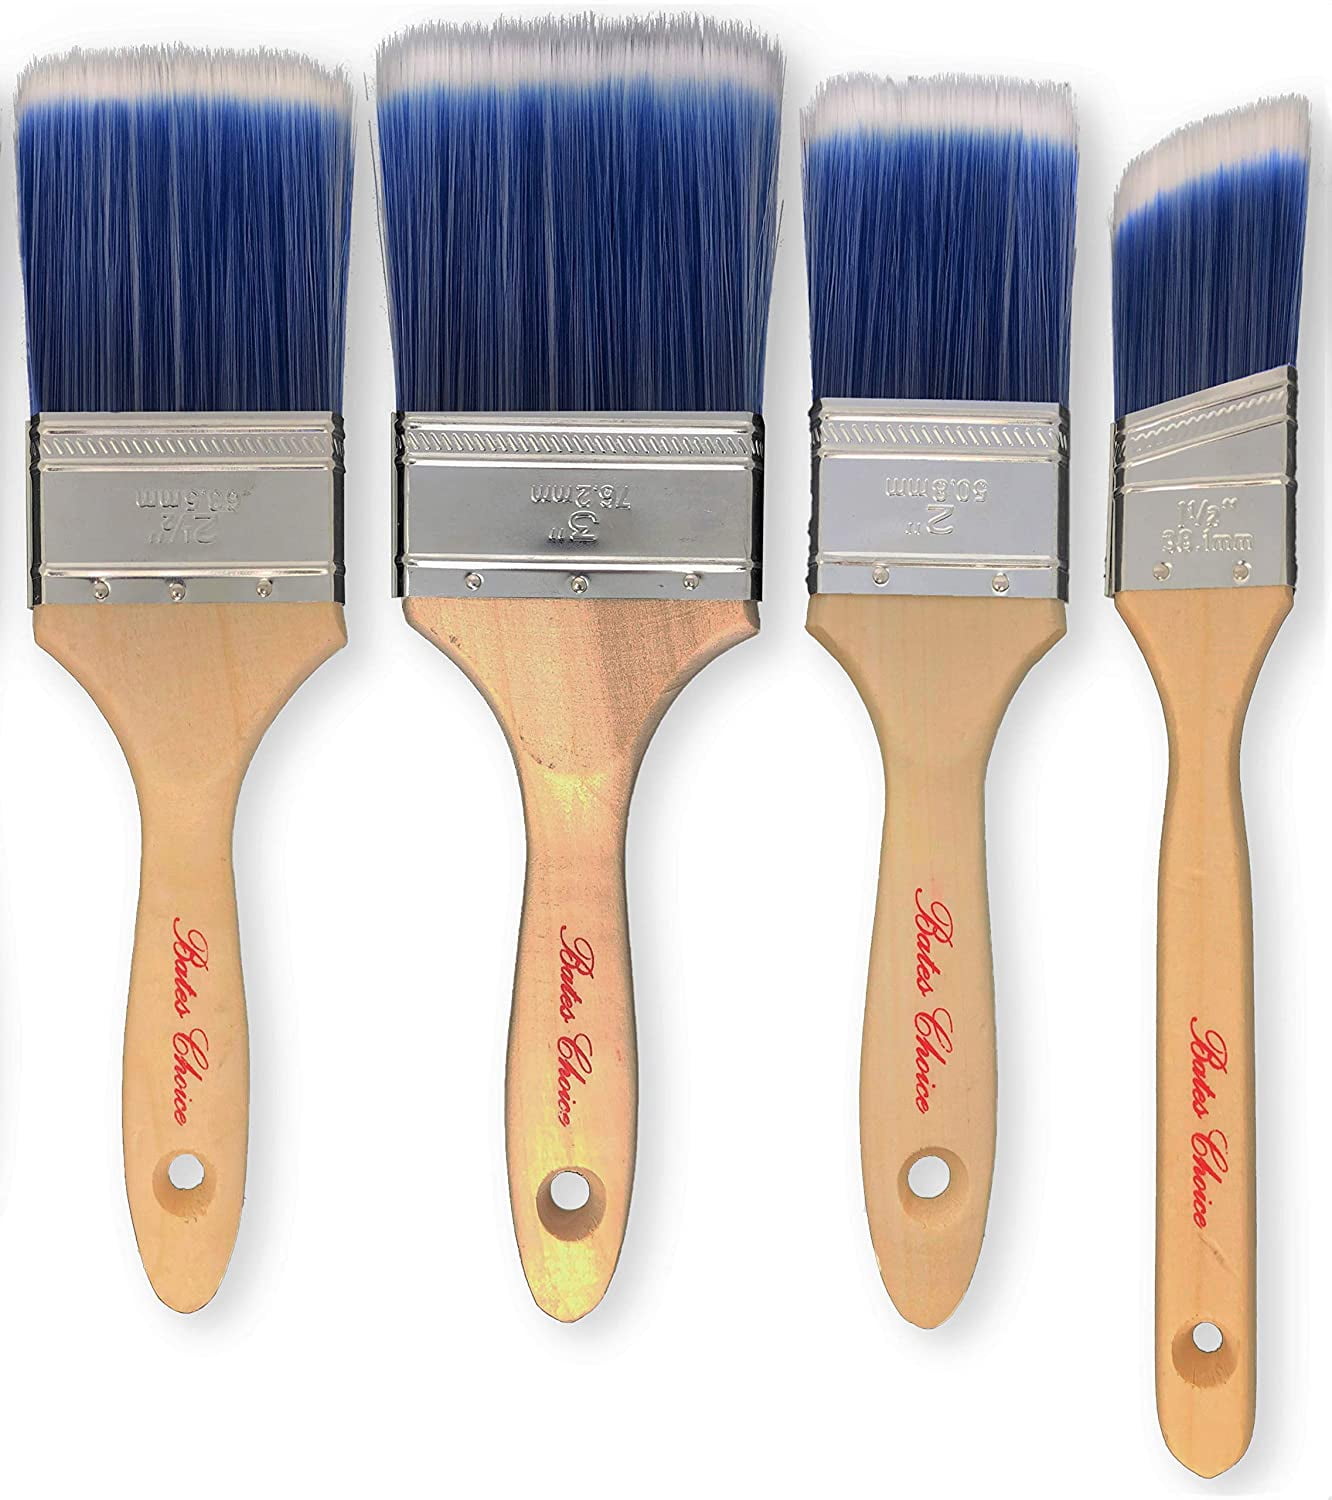 2 Angle Trim Paint Brushes 3 Professional Painting Tools Wood Handle Wall Decor